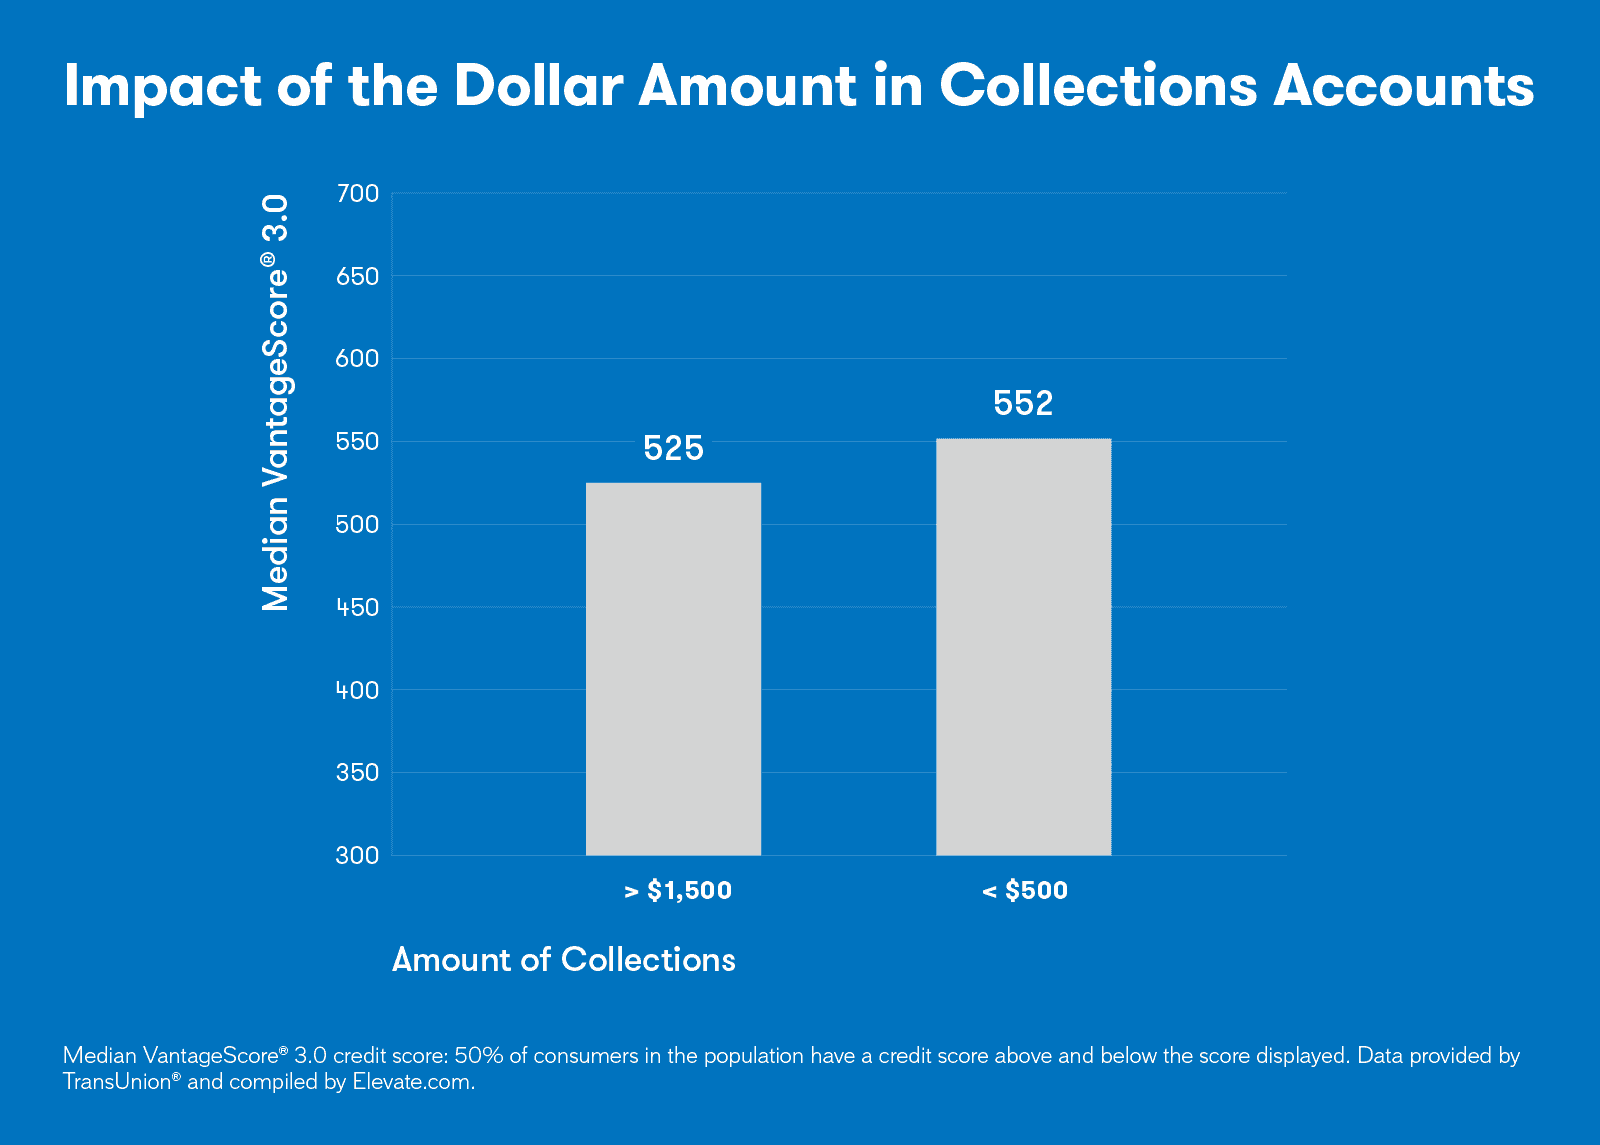 Graph showing the impact that the dollar amount in collections has on a credit score